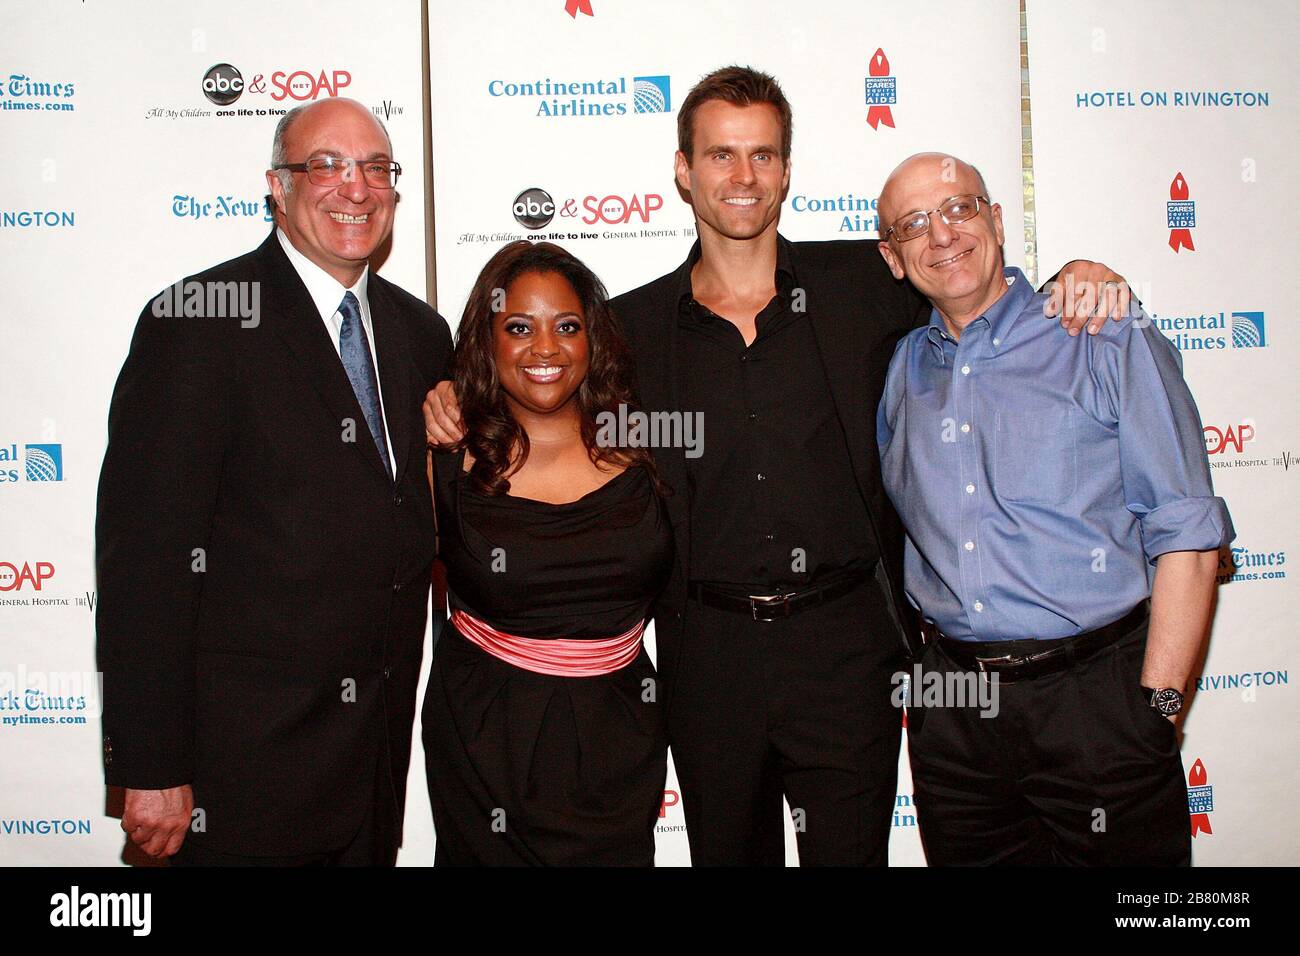 New York, NY, USA. 21 March, 2010. Brian Frons, Sherri Shepherd, Cameron Mathison, Tom Viola at the 6th Annual Broadway Cares Equity Fights AIDS benefit at The New York Marriott Marquis. Credit: Steve Mack/Alamy Stock Photo